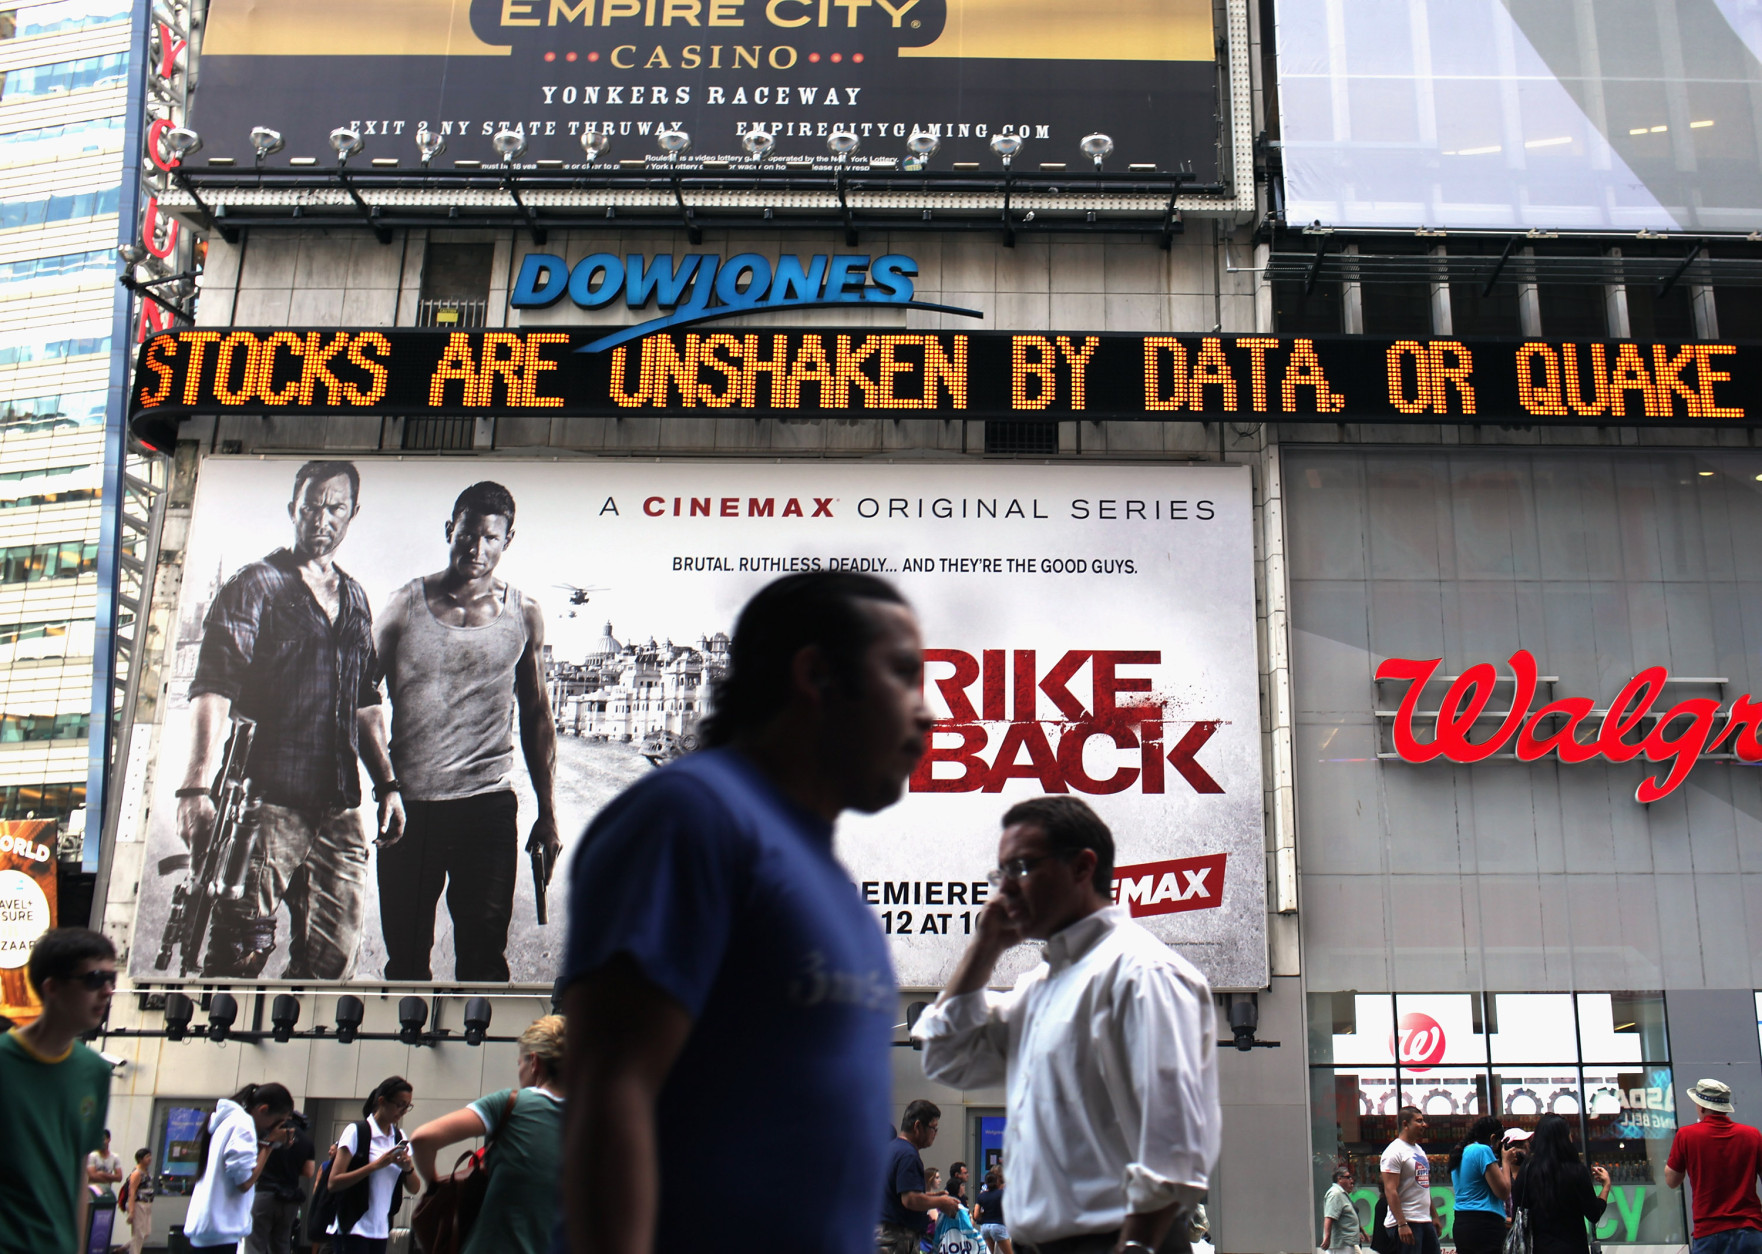 NEW YORK, NY - AUGUST 23: A news ticker in Times Square comments on an earlier earthquake on August 23, 2011 in New York City.  The epicenter of the 5.8 earthquake was located near Louisa in central Virginia. Two nuclear power plants at the North Anna Power Station in the same county were reportedly taken offline.  (Photo by Spencer Platt/Getty Images)